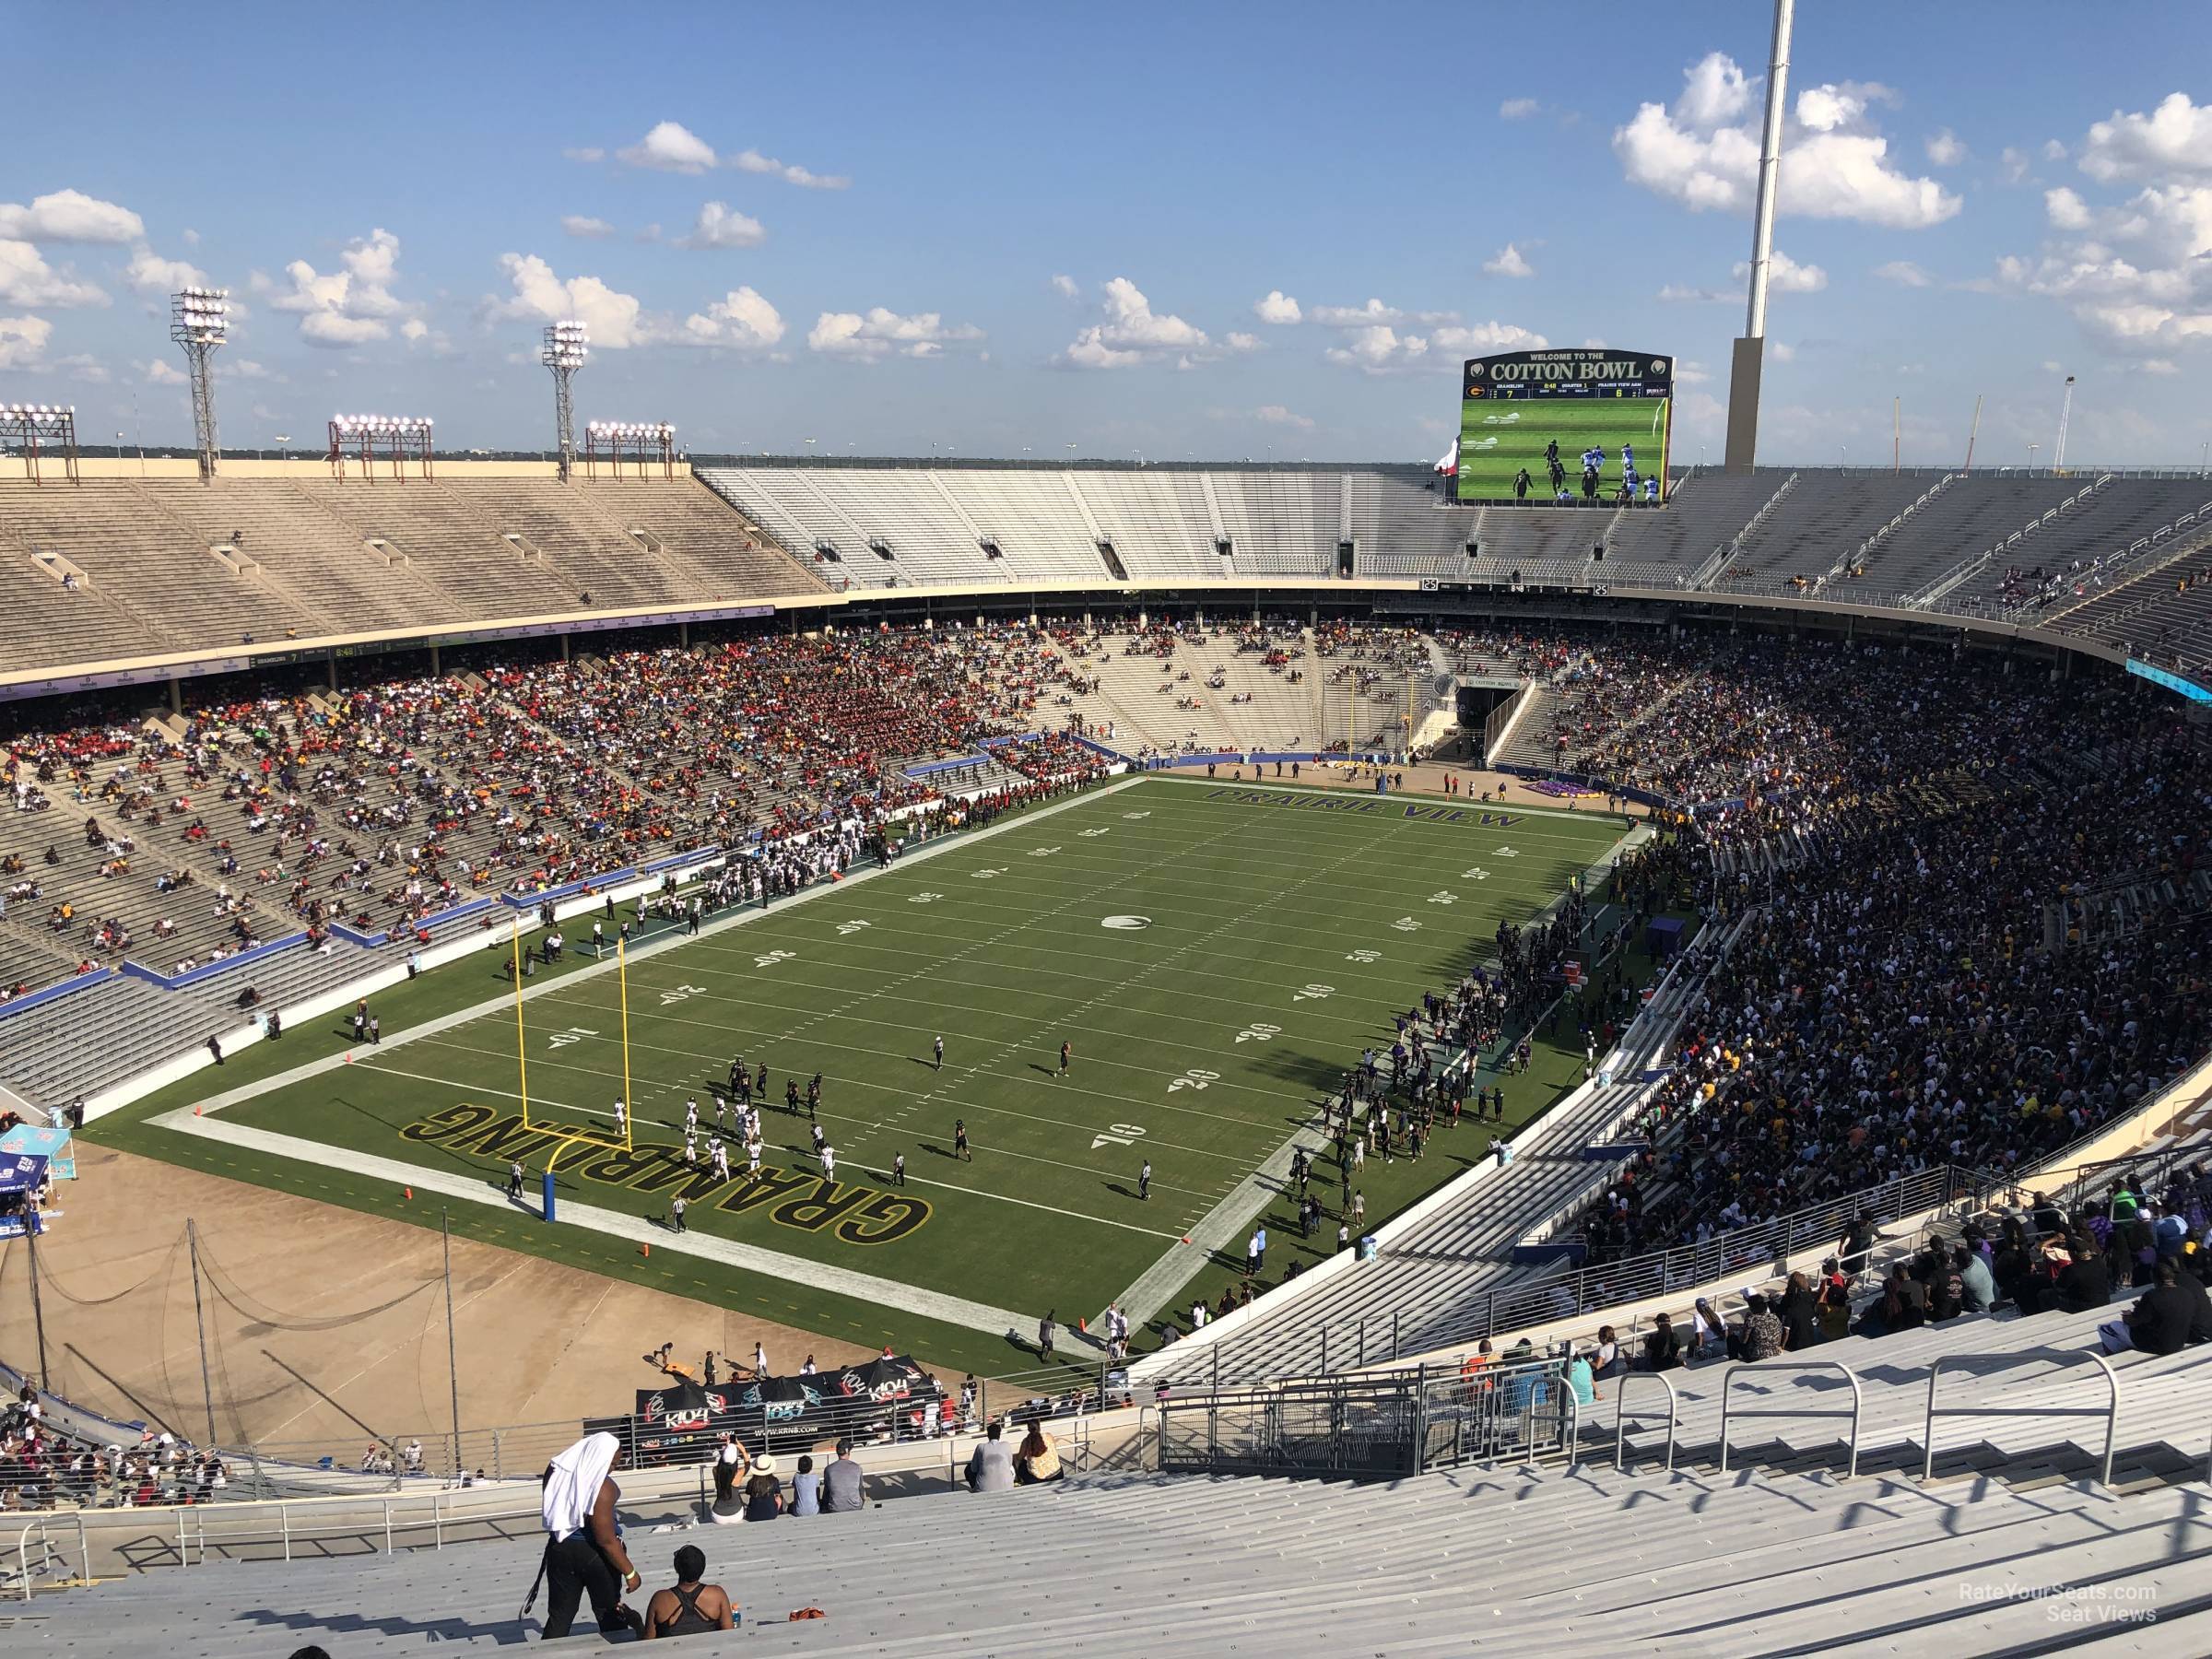 section 114, row 34 seat view  - cotton bowl